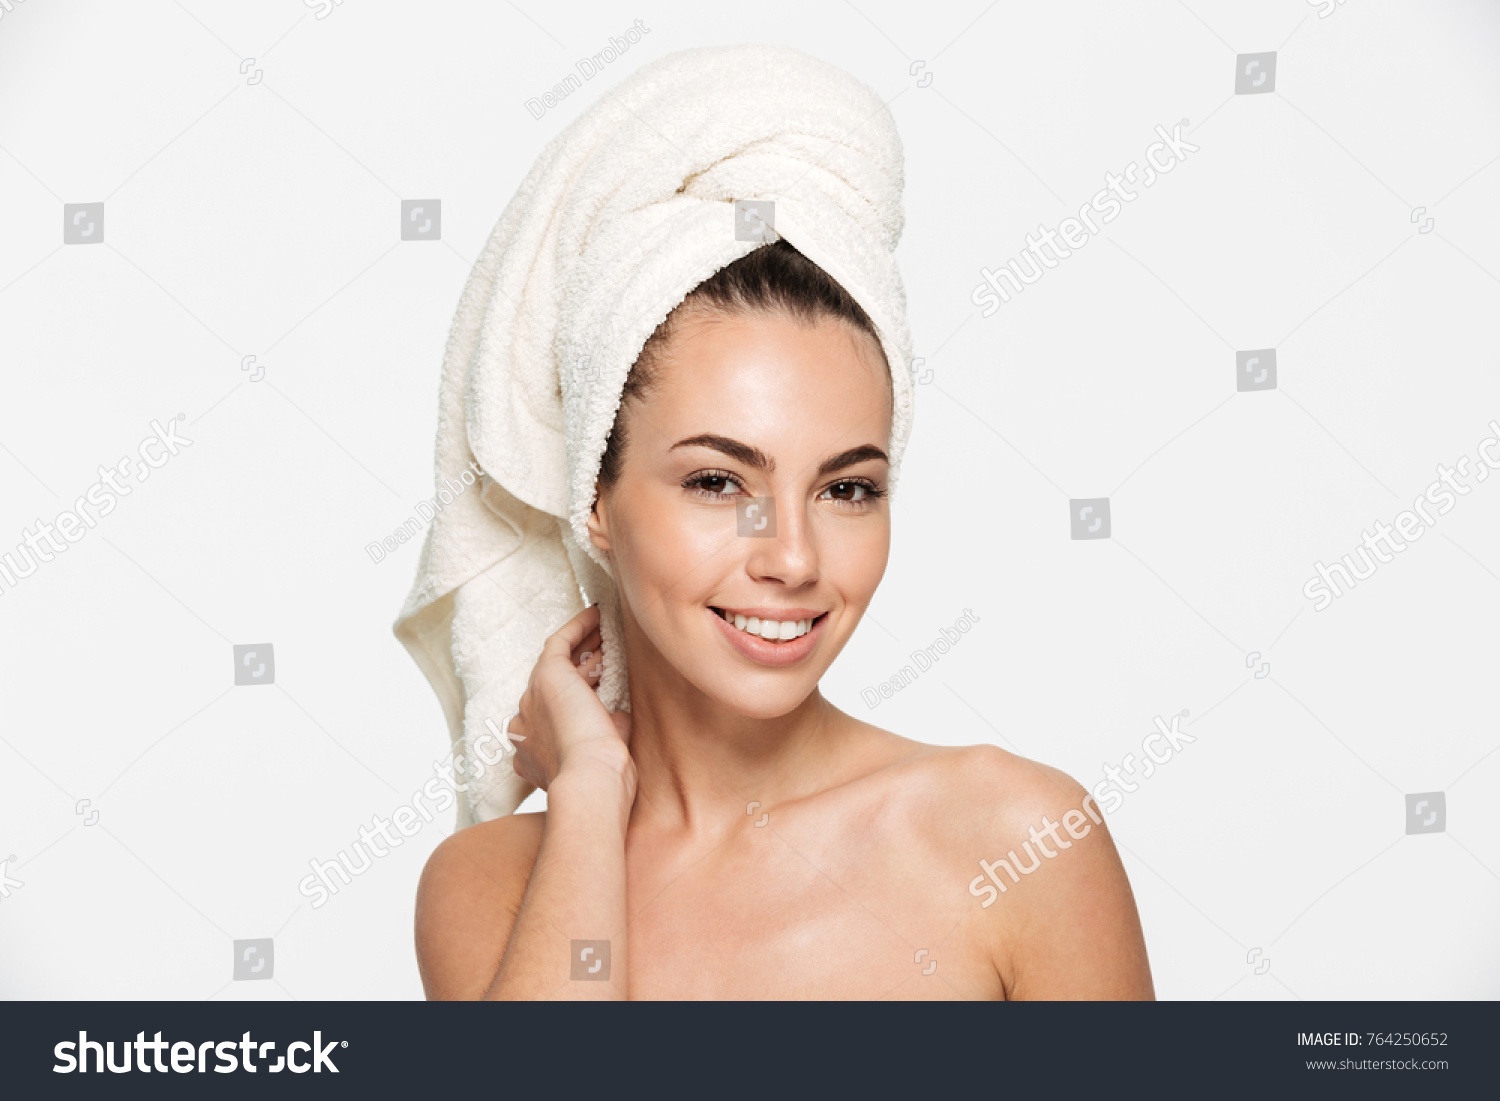 Beauty Portrait Smiling Attractive Half Naked Stock Photo Edit Now